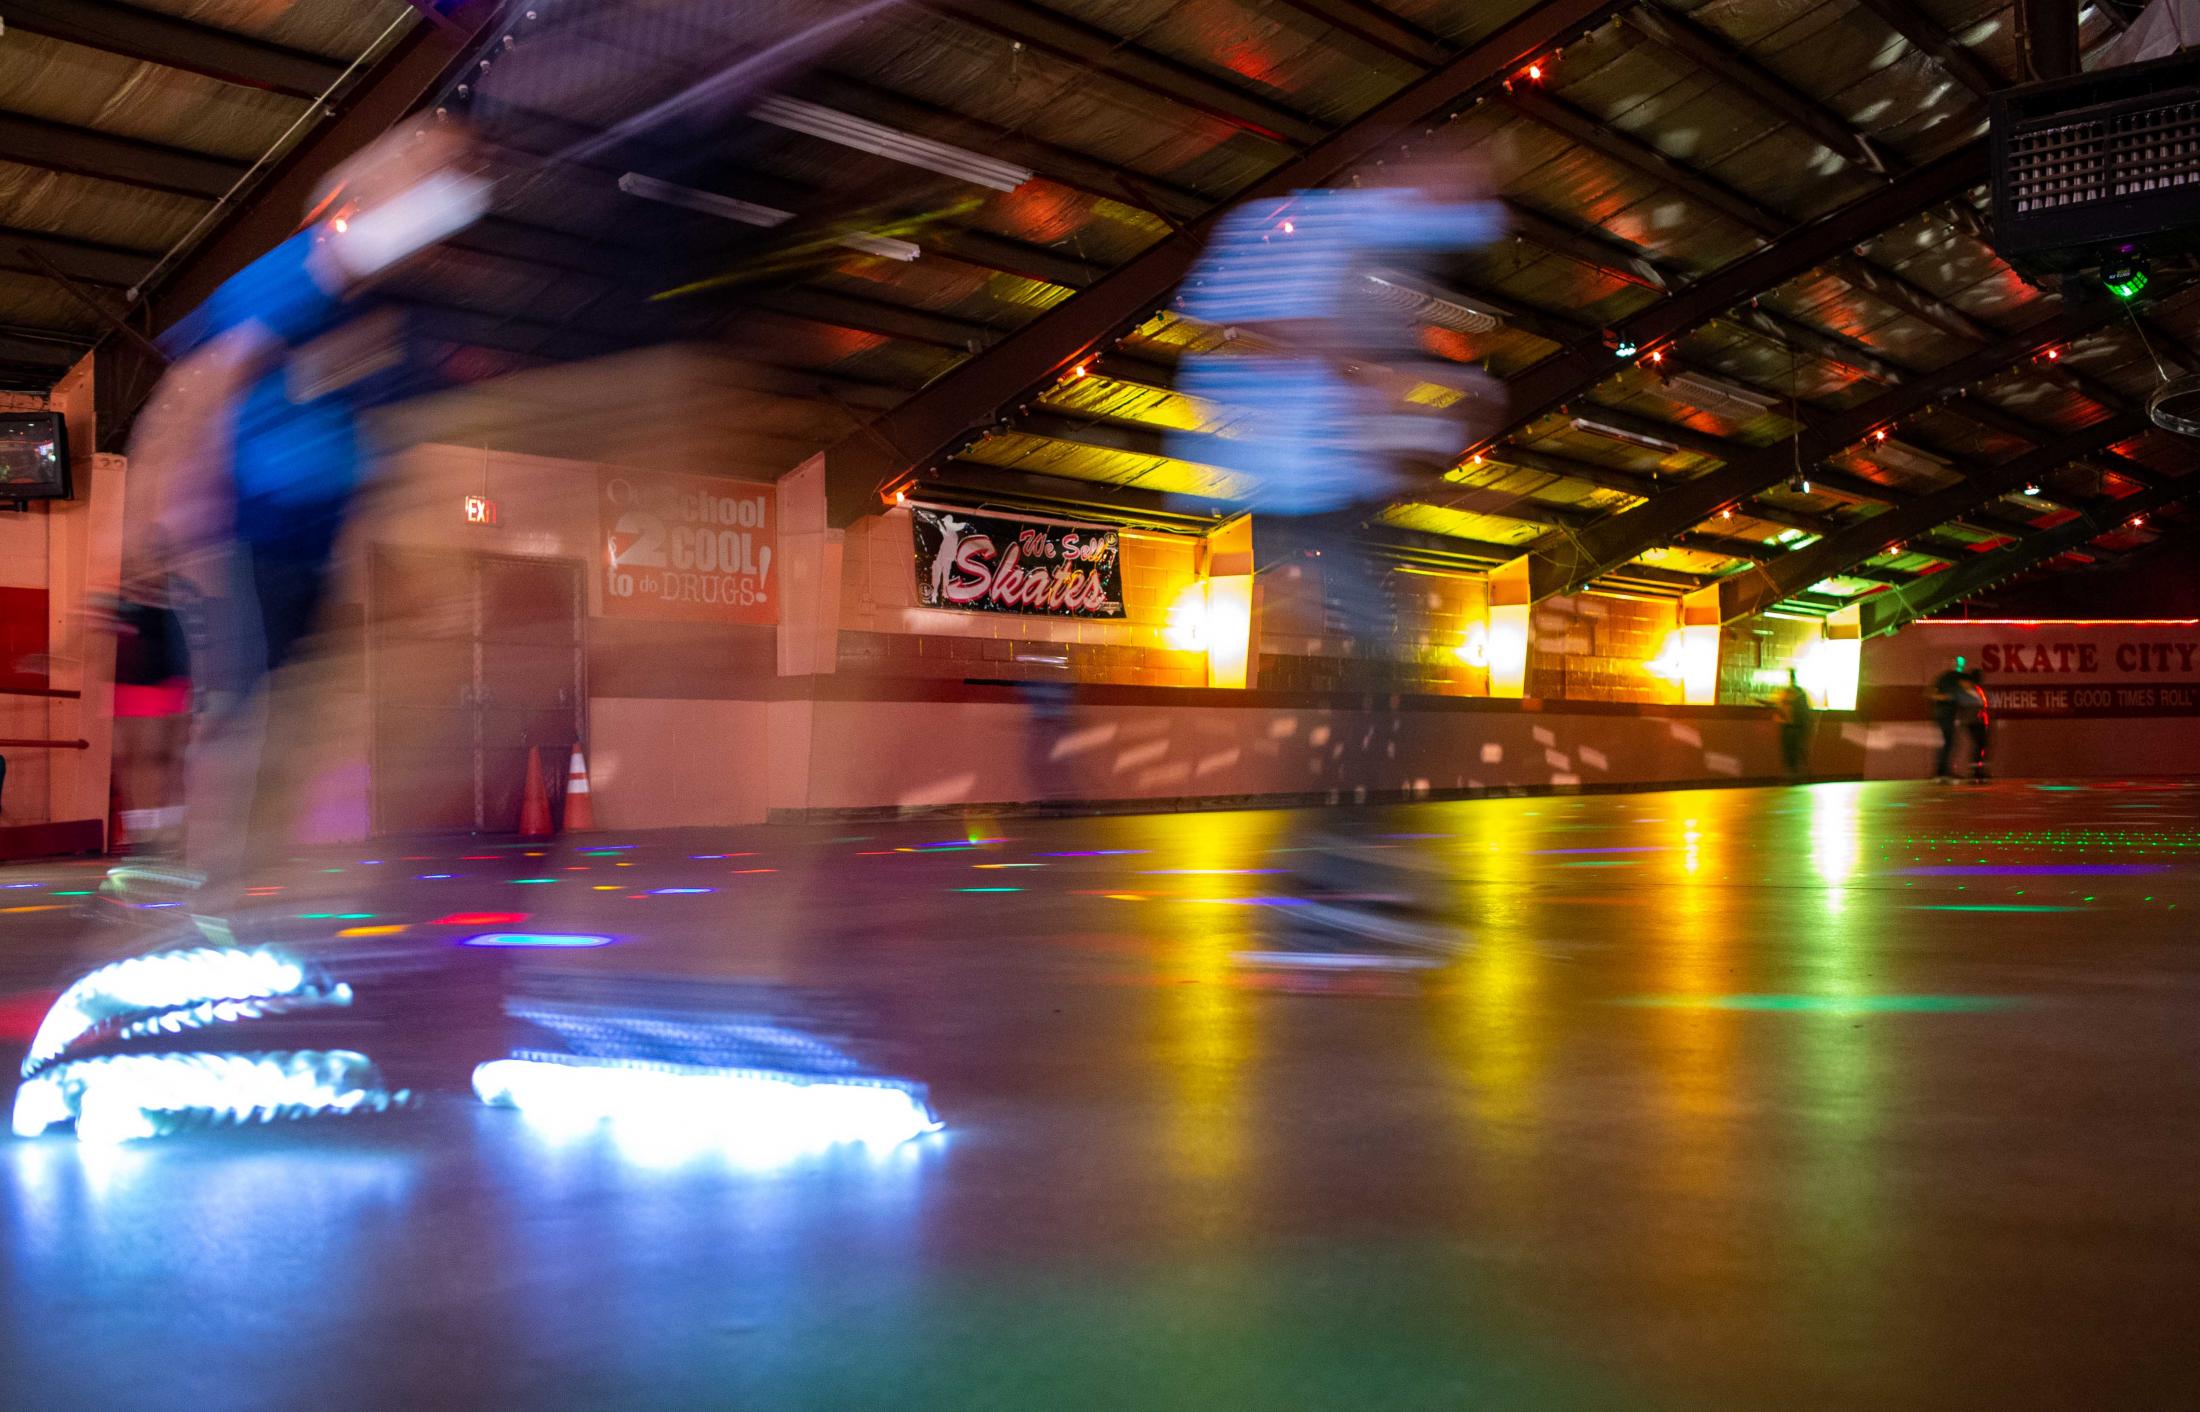 Skaters glide past the entrance to the skating rink at Skate City on Monday, July 12, 2021, in East St. Louis. Skate City is owned by Lawrence Wise, Sr., and his son Larry Wise, daughter Laura Wise and wife Patricia Wise also work with him at the skating rink.